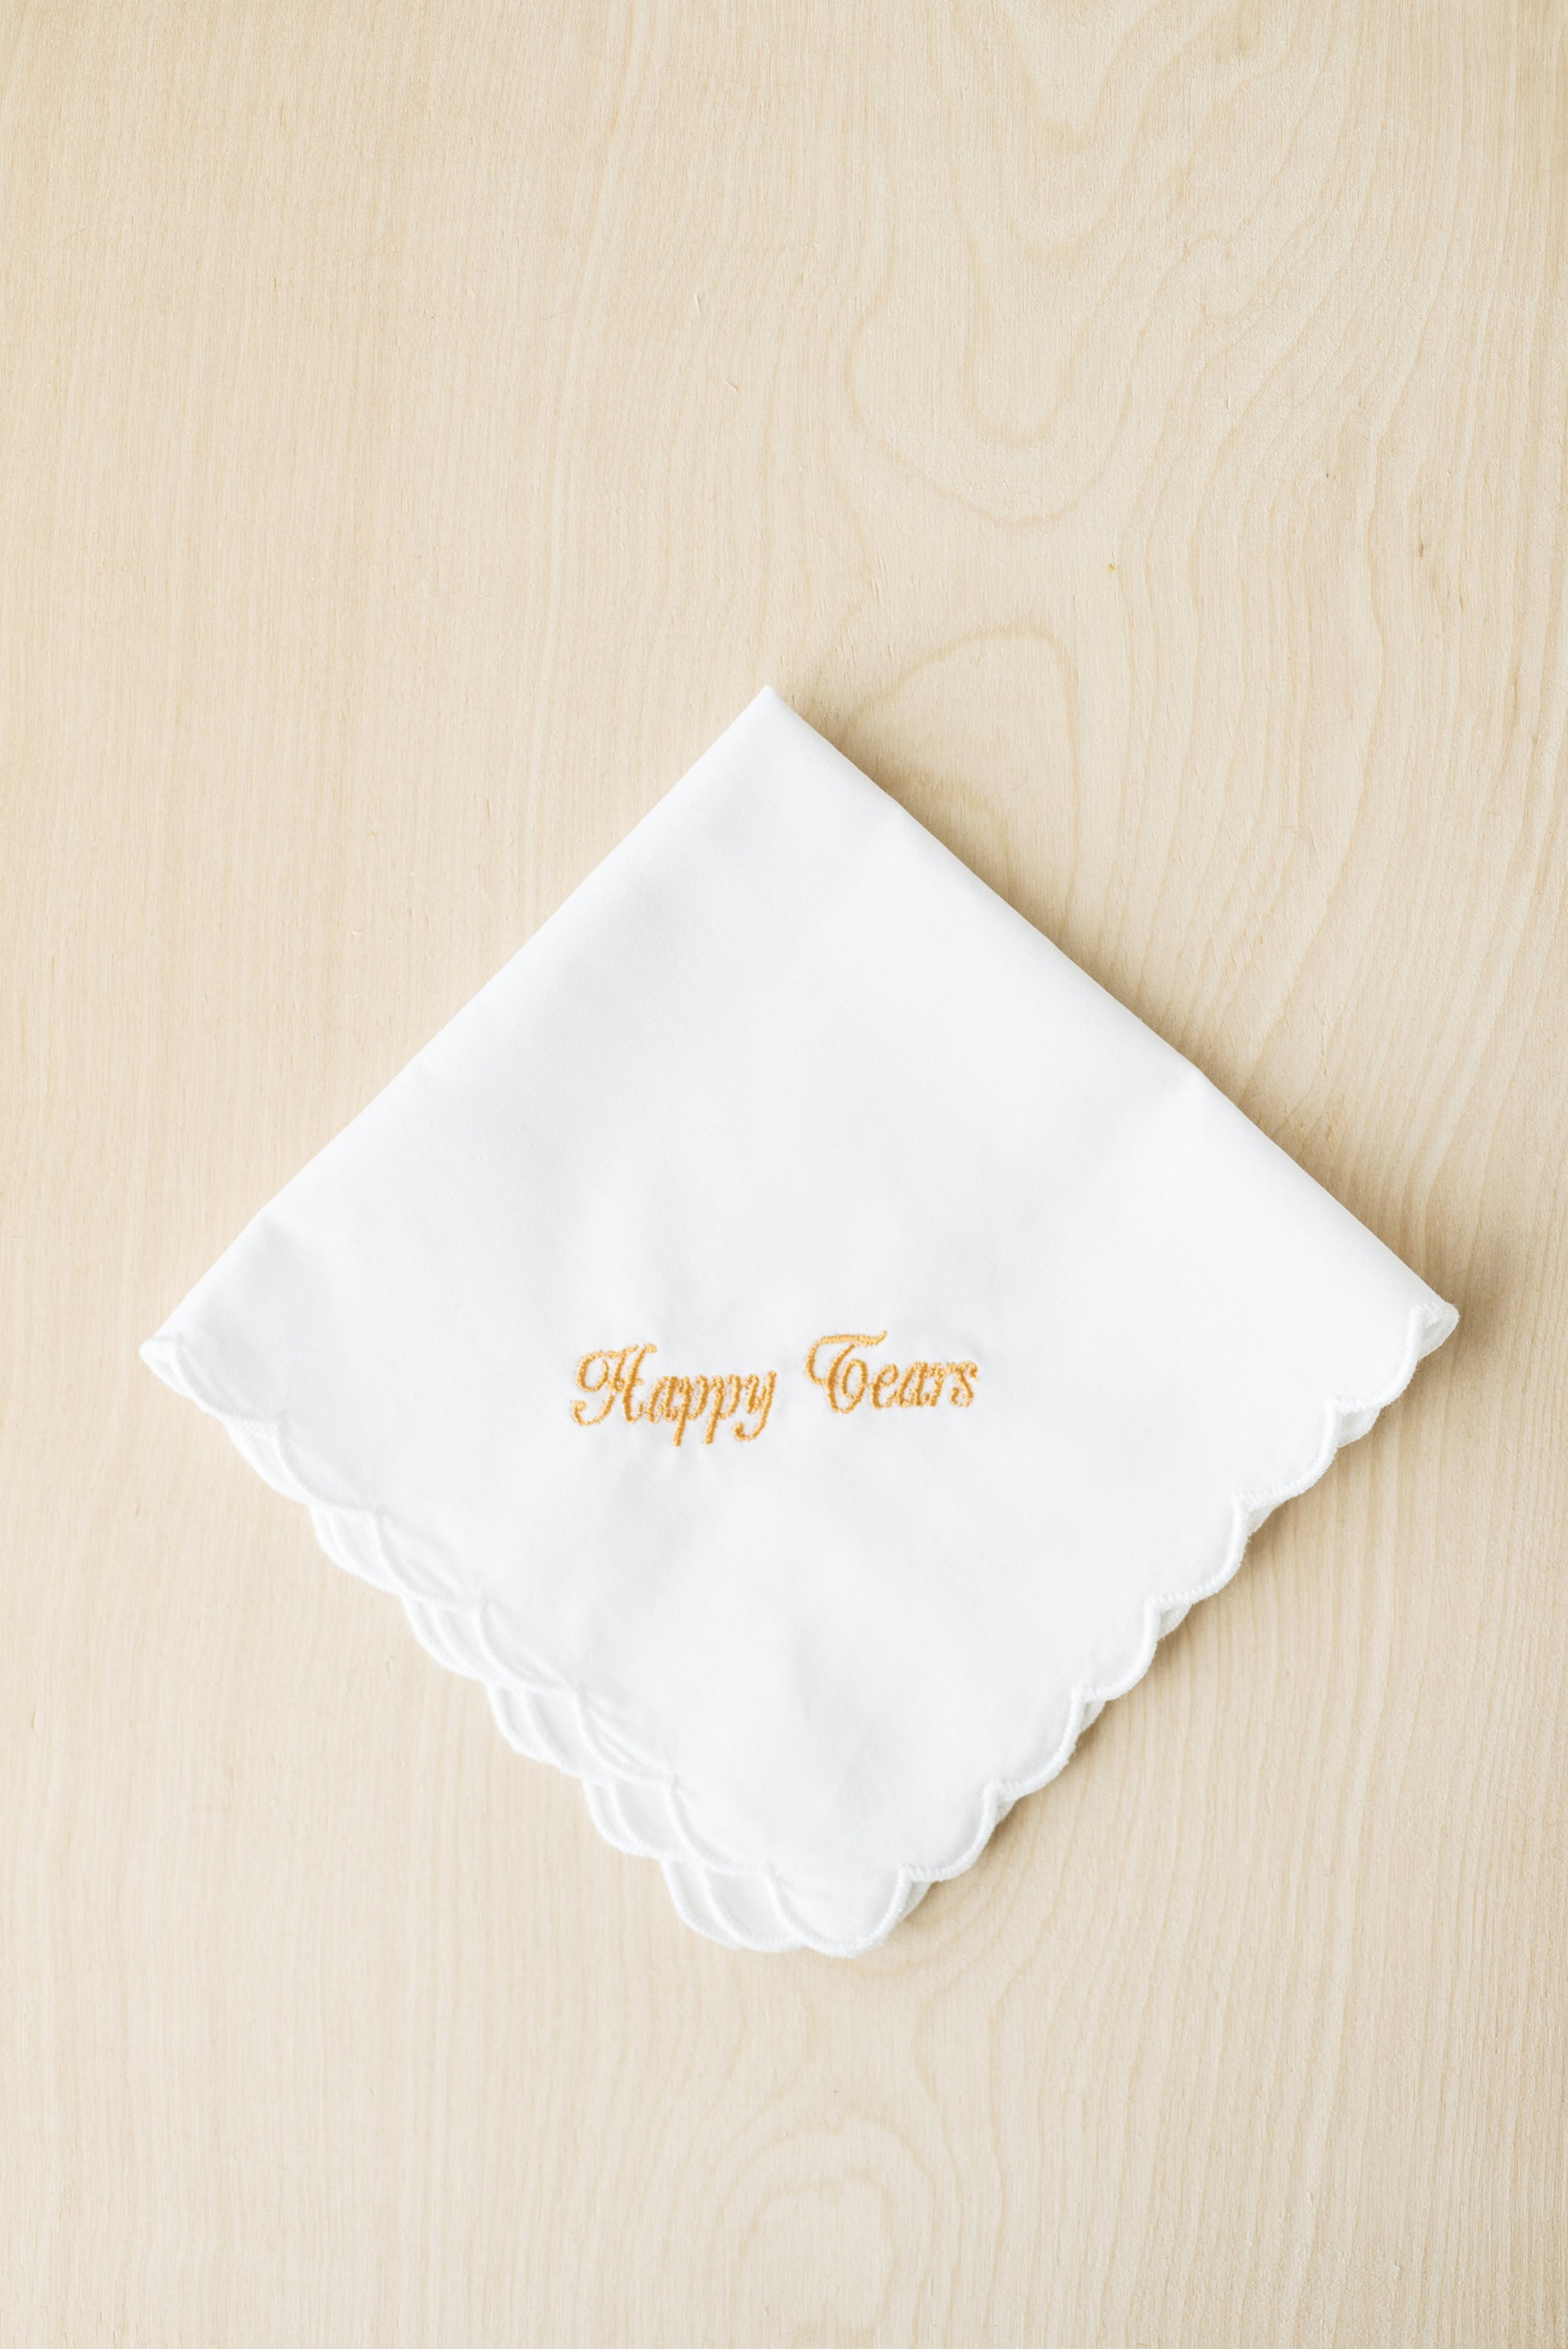 Scallop Edge Handkerchief Embroidered With Gold Thread